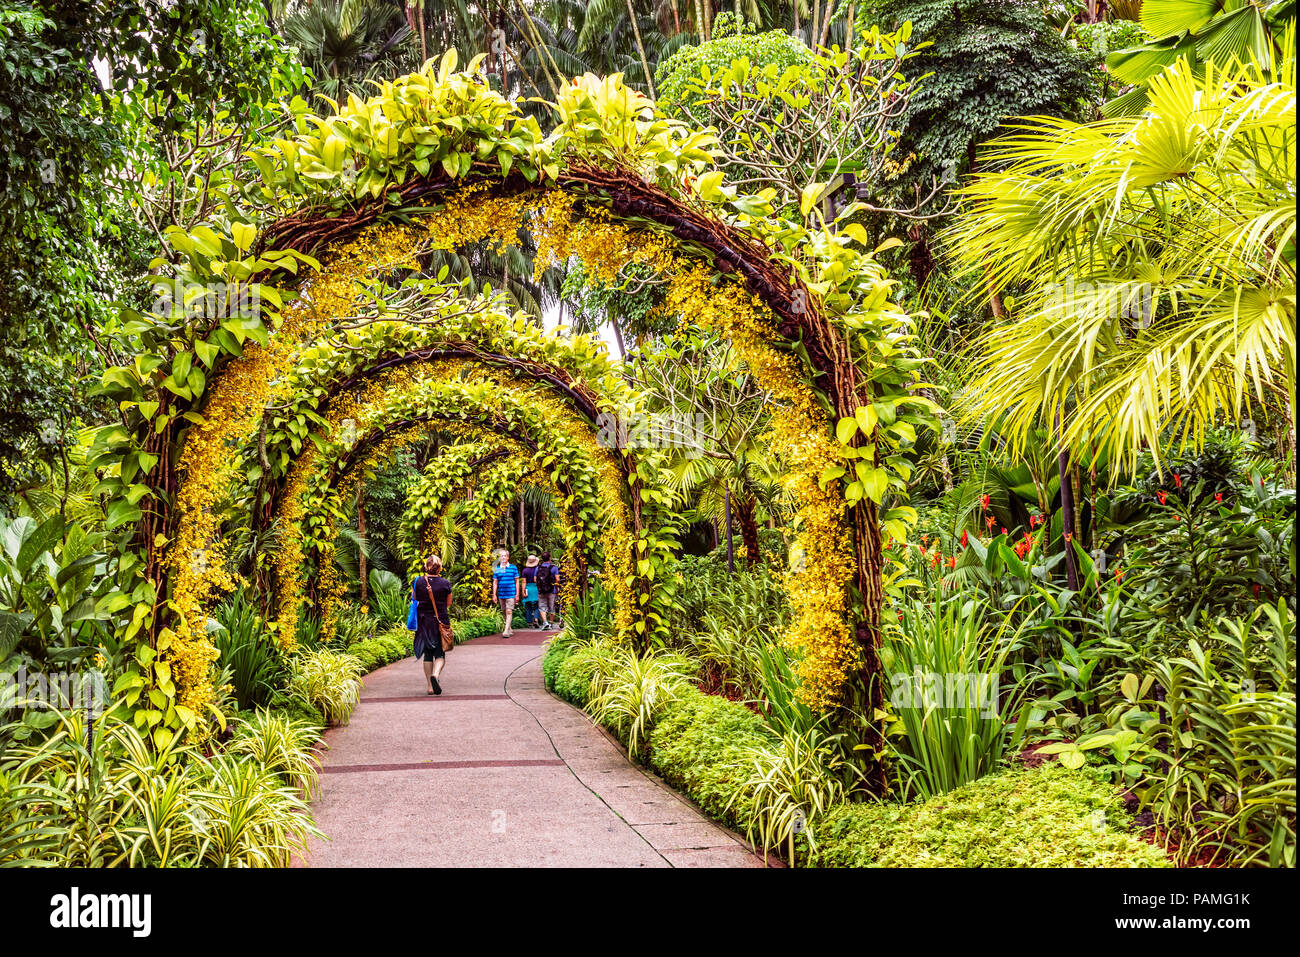 Singapore Jan 11, 2018: Tourists walking on pedestrian pathway arranged by small yellow orchid flowers placed on arch supports in Singapore Botanic Ga Stock Photo